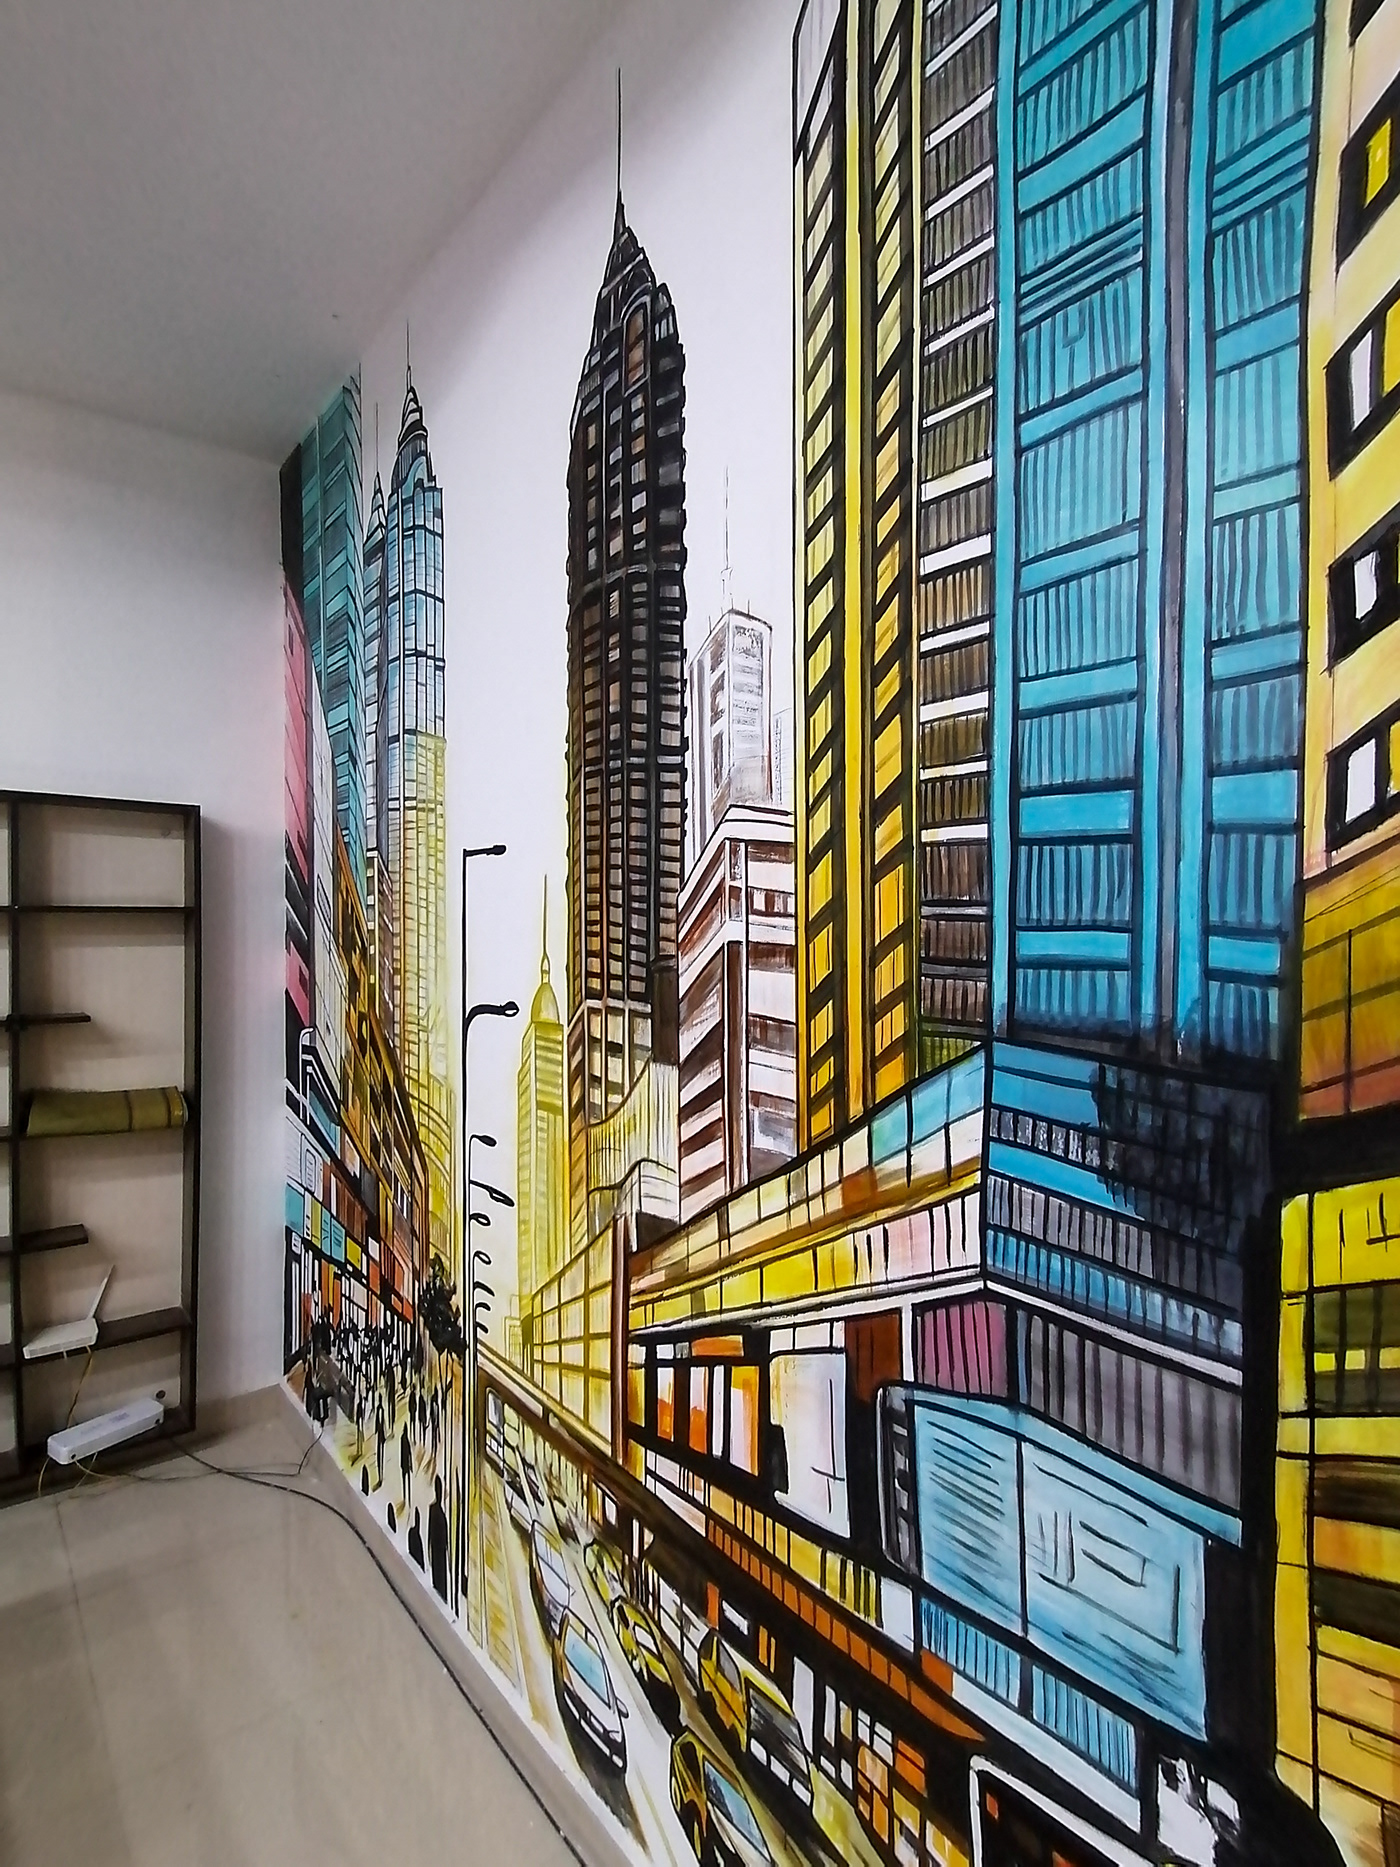 cityscape Mural painting   acrylic painting wallart Street Art  граффити ILLUSTRATION  architecture perspective drawing